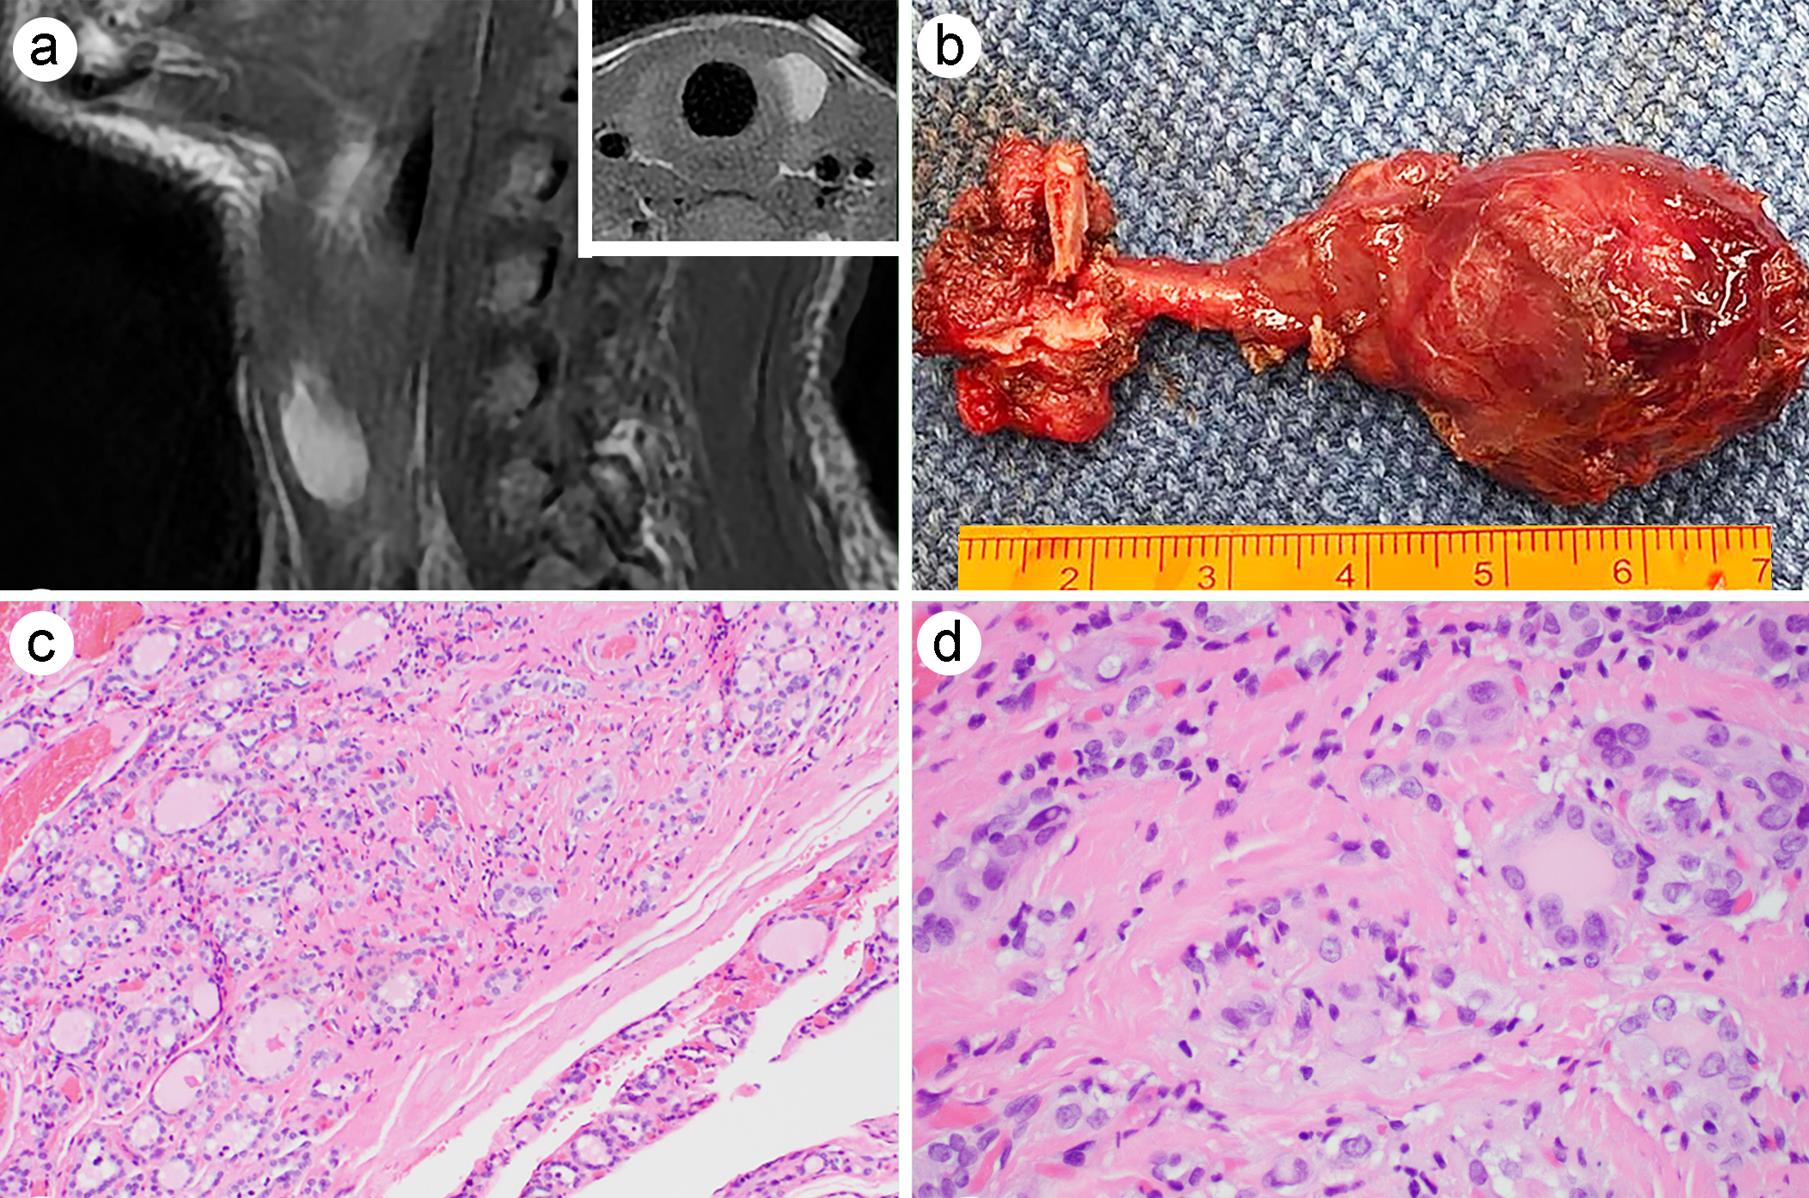 Incidental identification of a papillary thyroid carcinoma (PTC) in a laterally located thyroglossal duct cyst.